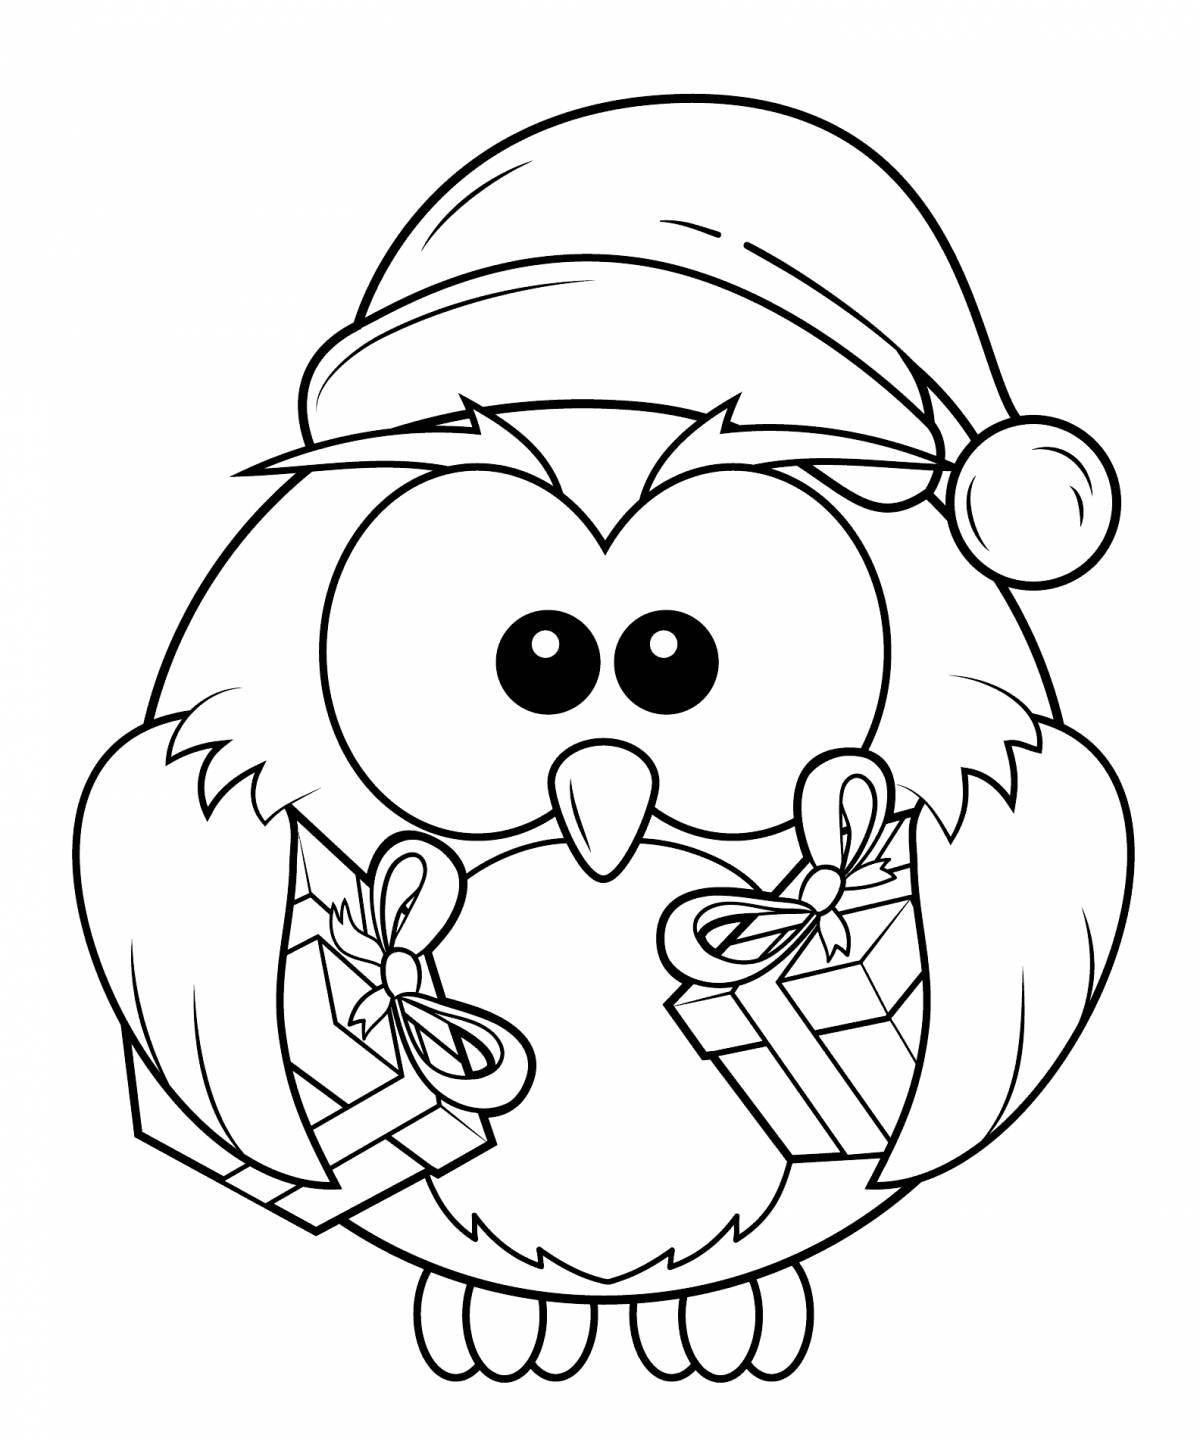 Glowing christmas bird coloring page